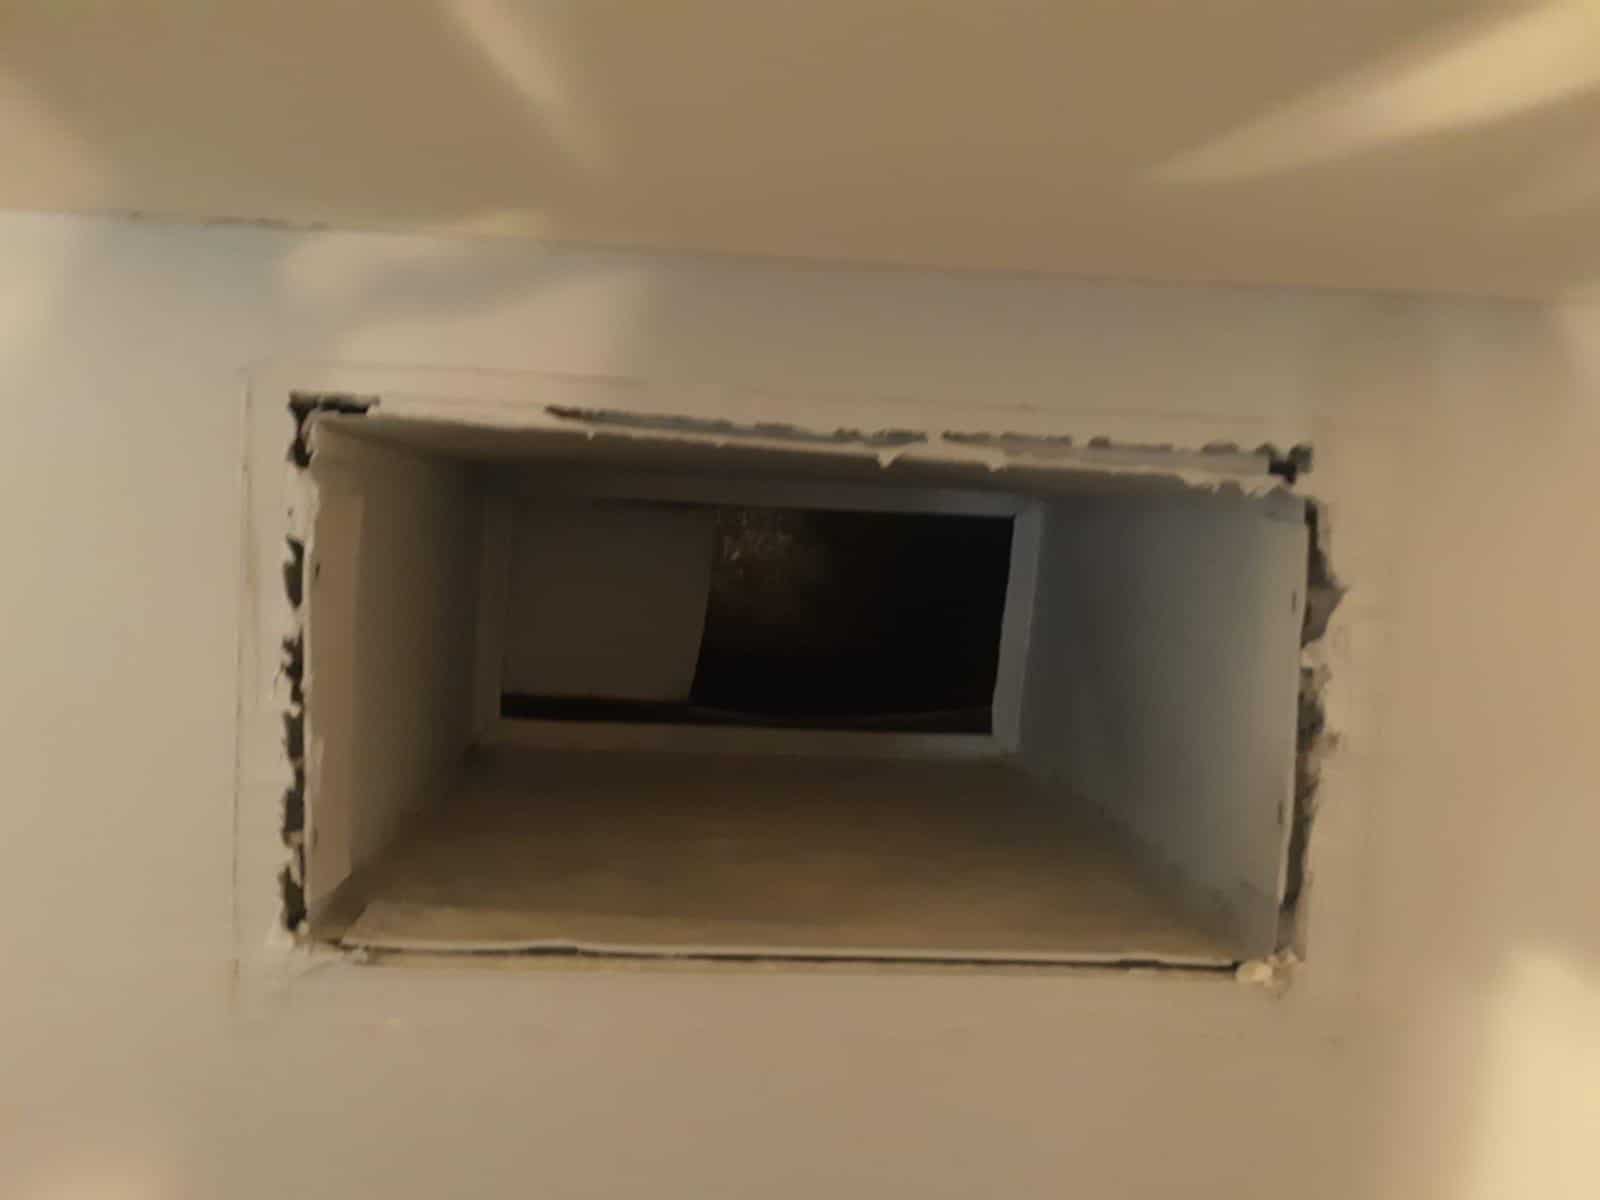 “Find Air Duct Cleaning near me”